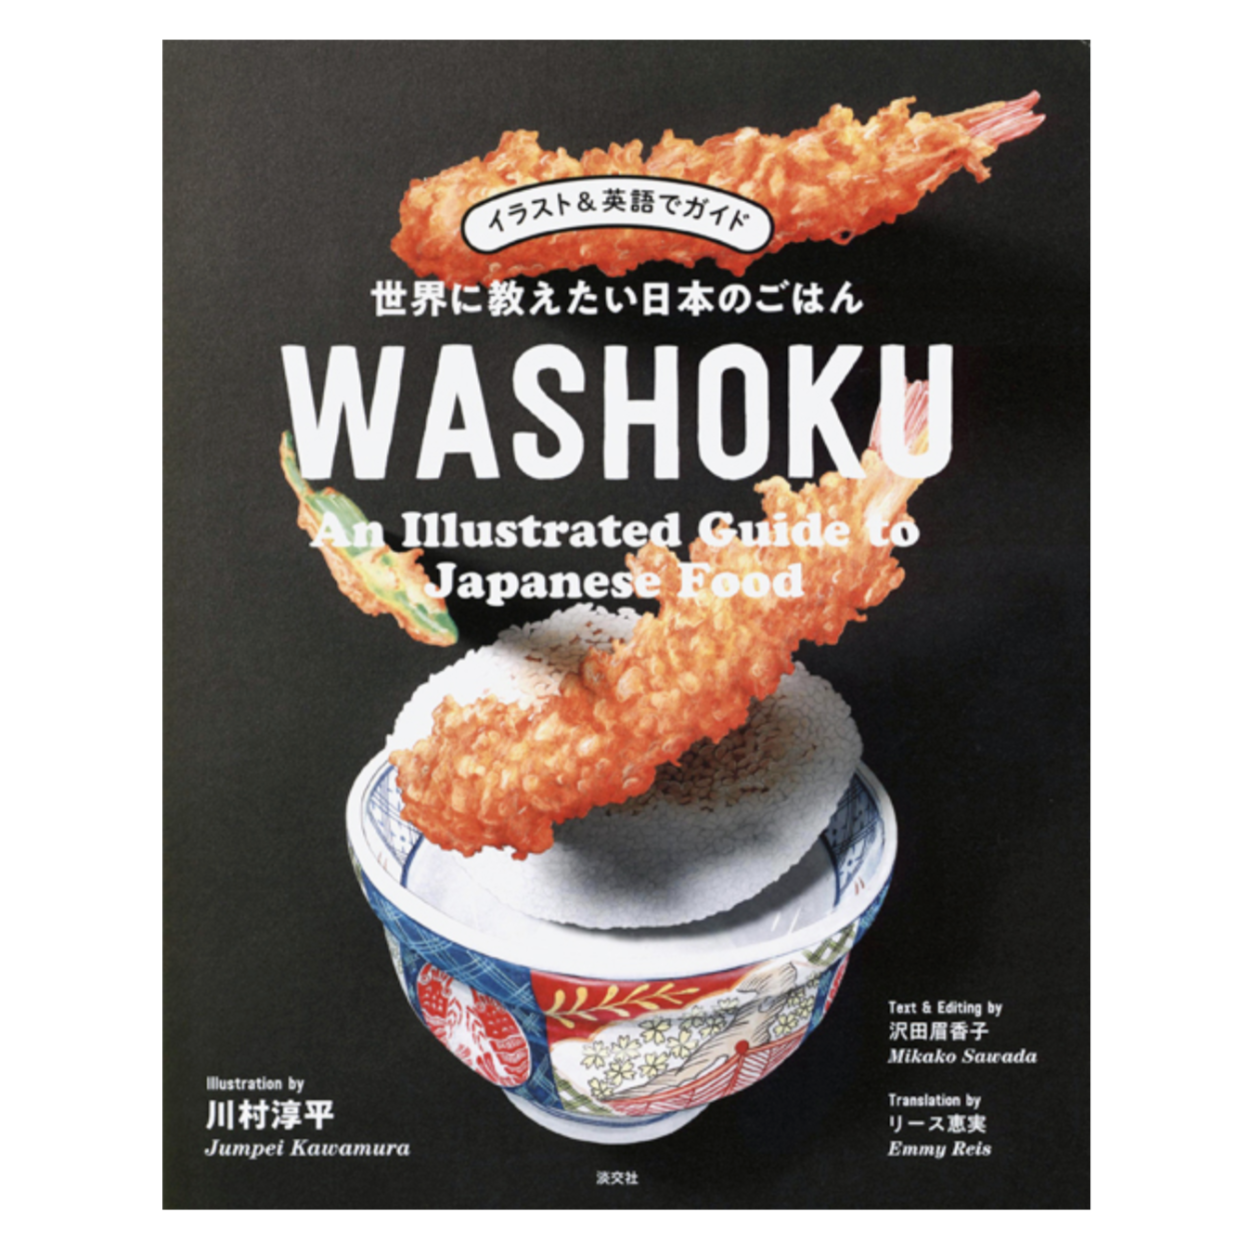 Washoku: An Illustrated Guide to Japanese Food